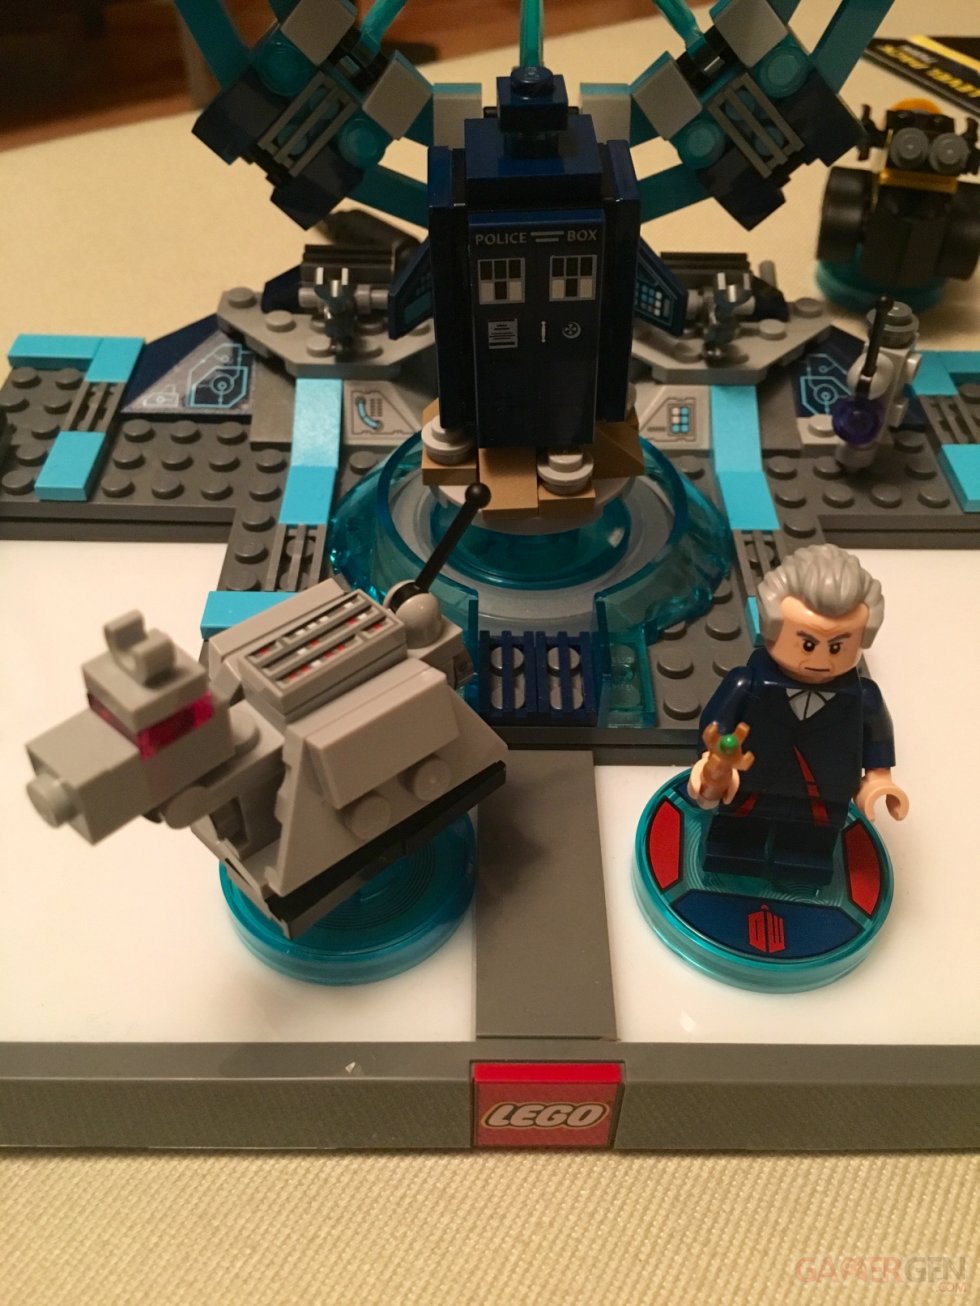 LEGO Dimensions Doctor Who Fun Pack Unboxing deballage tardis k9 - 11